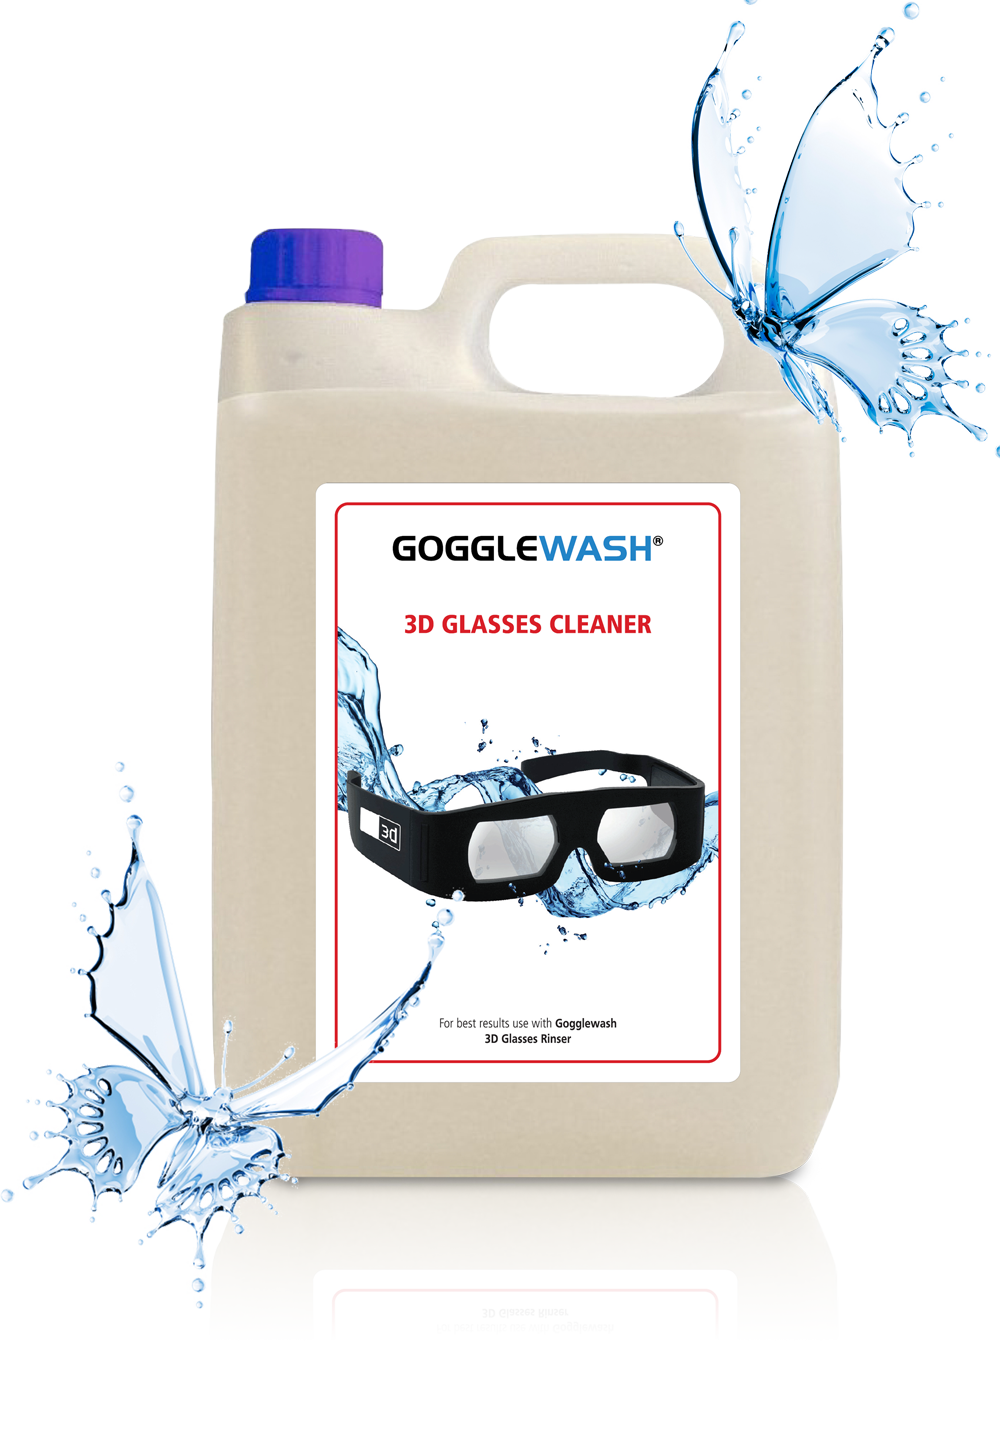 Clenaware Systems - 3D Glasses Cleaner - Gogglewash